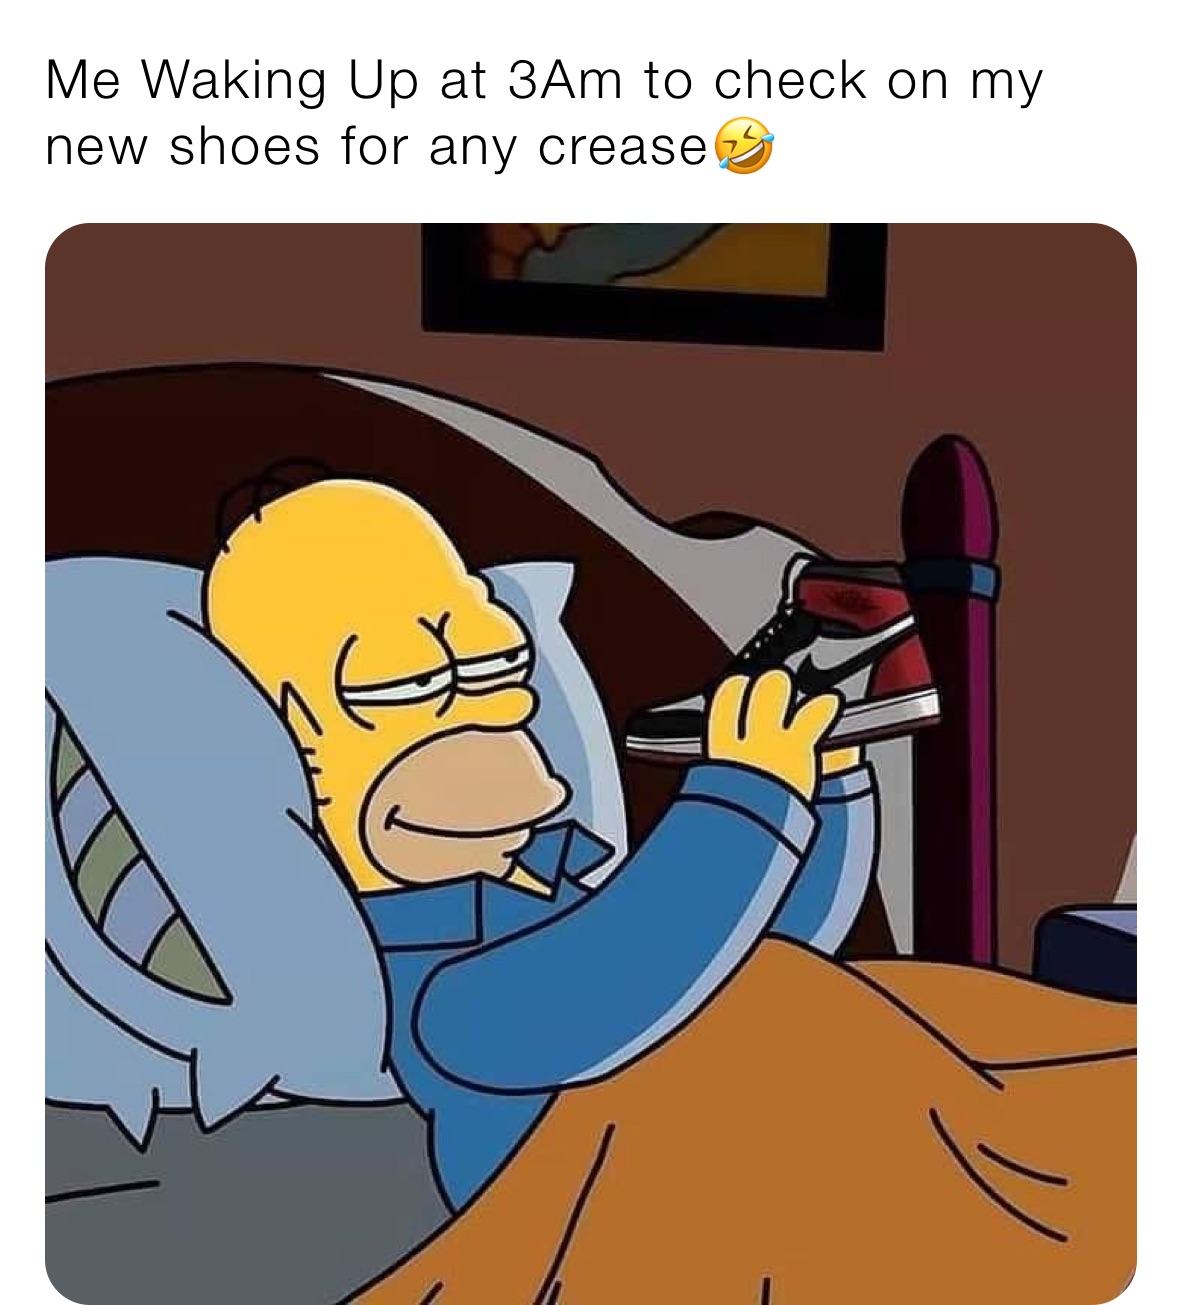 Me Waking Up at 3Am to check on my new shoes for any crease? | @OT_Rudy |  Memes